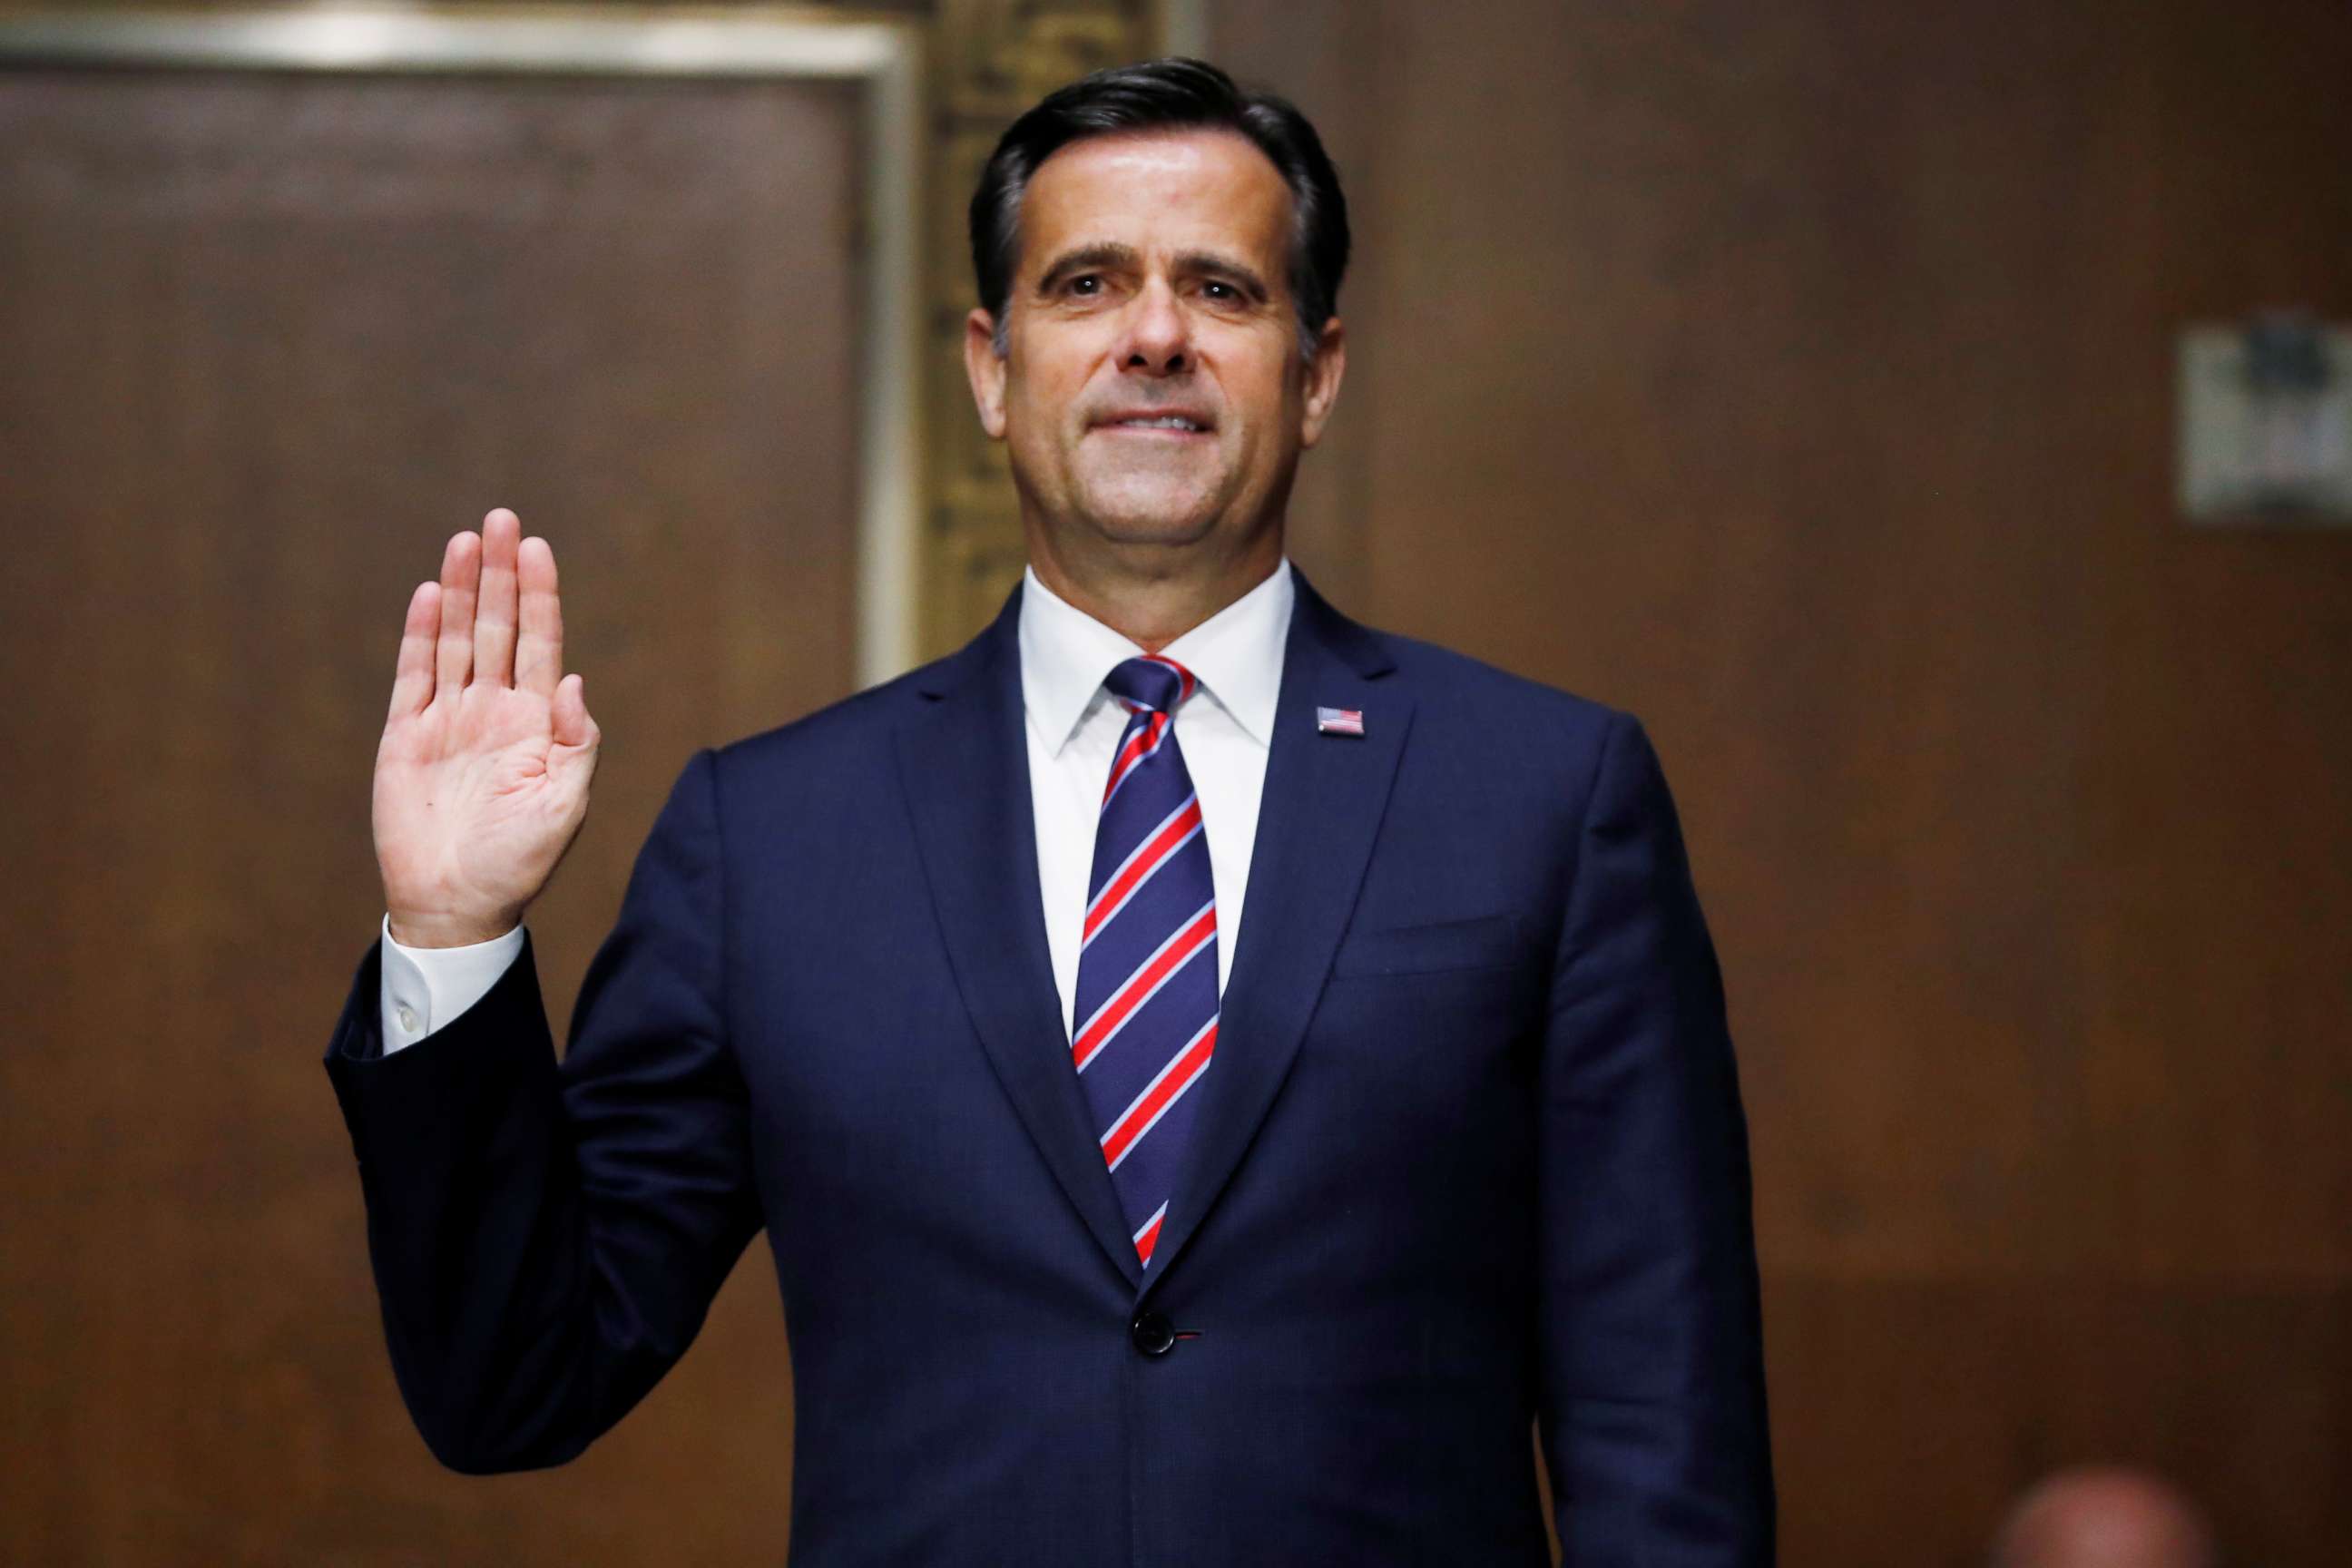 PHOTO: Rep. John Ratcliffe is sworn in before a Senate Intelligence Committee nomination hearing on Capitol Hill in Washington, May 5, 2020.